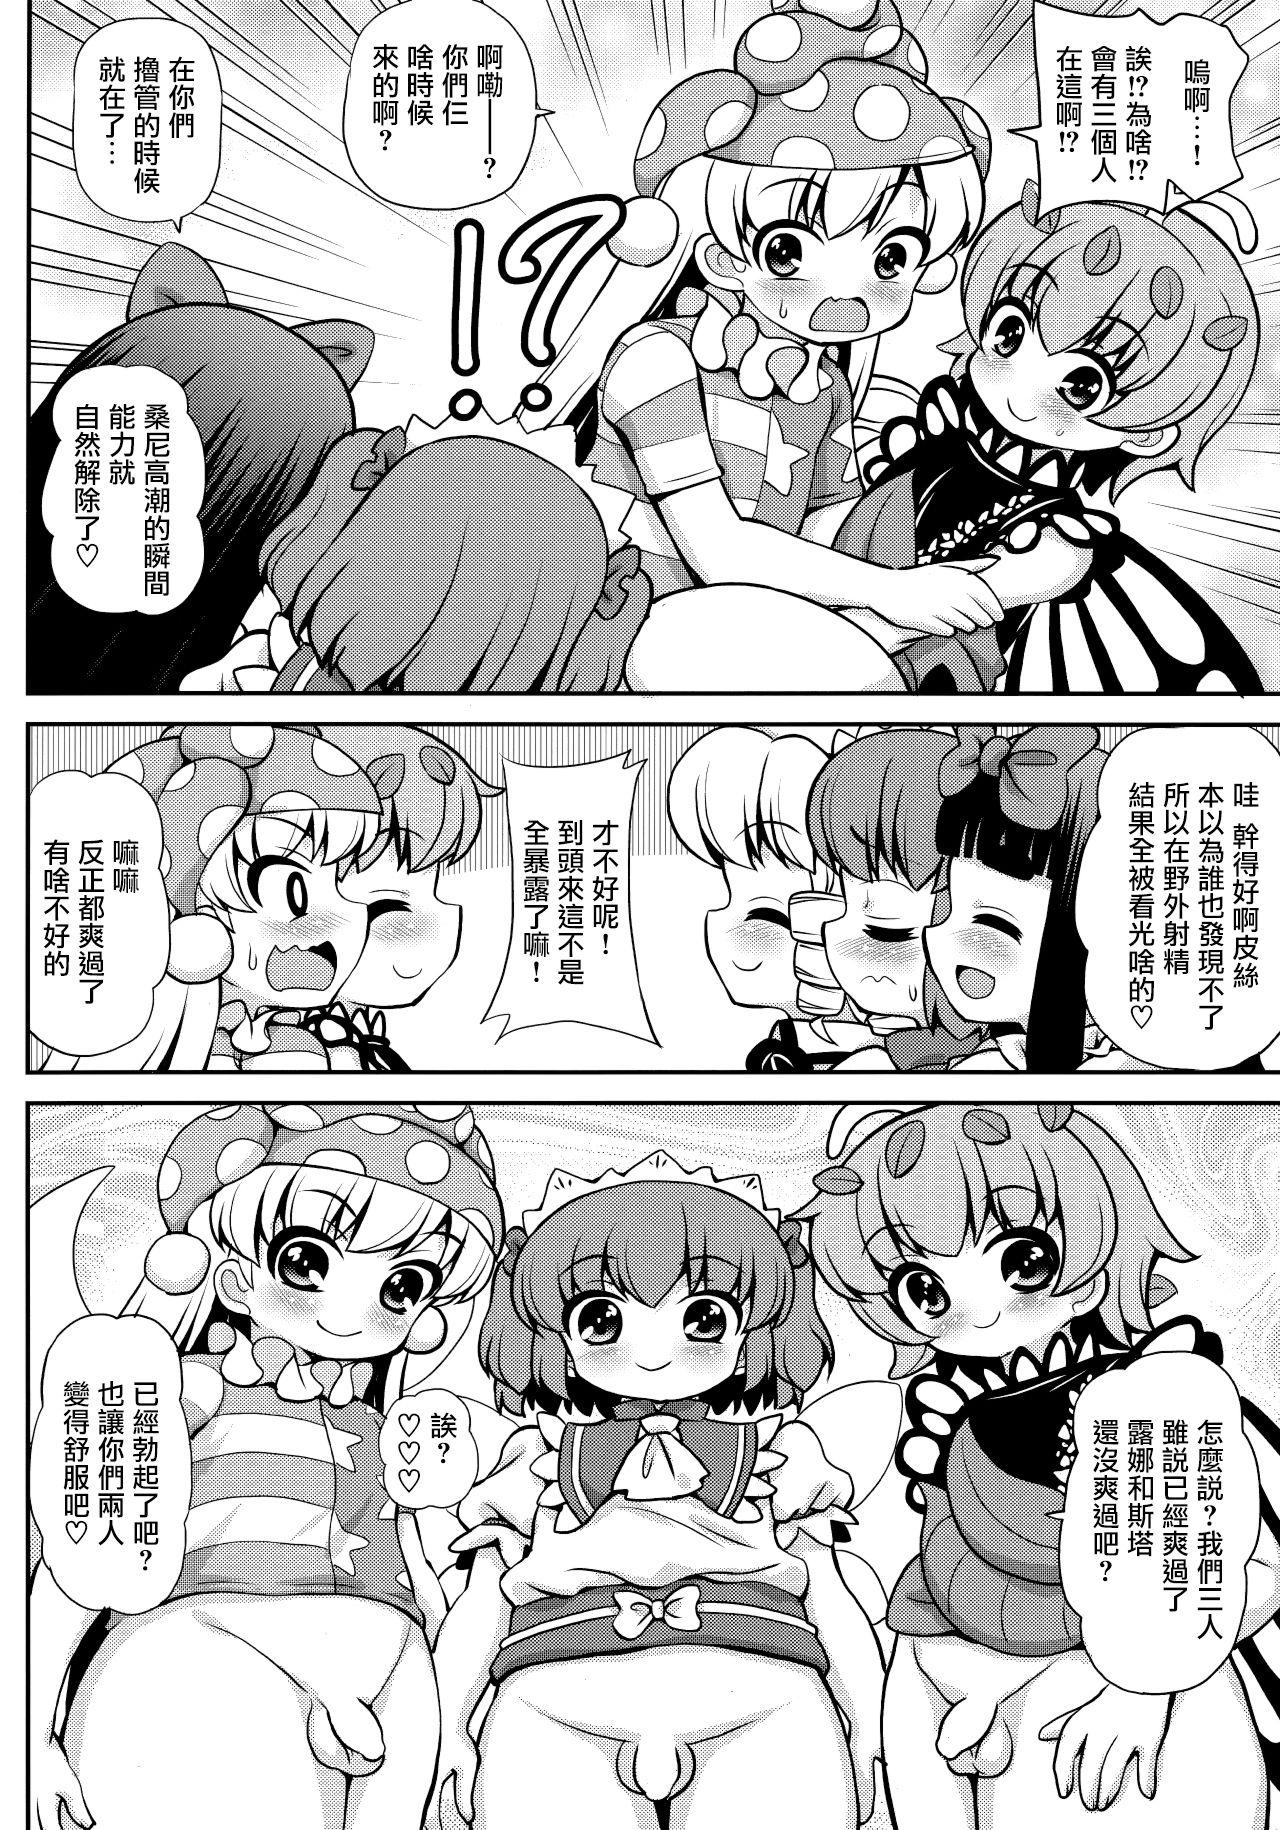 Classy Quint Ejaculation - Touhou project Liveshow - Page 10